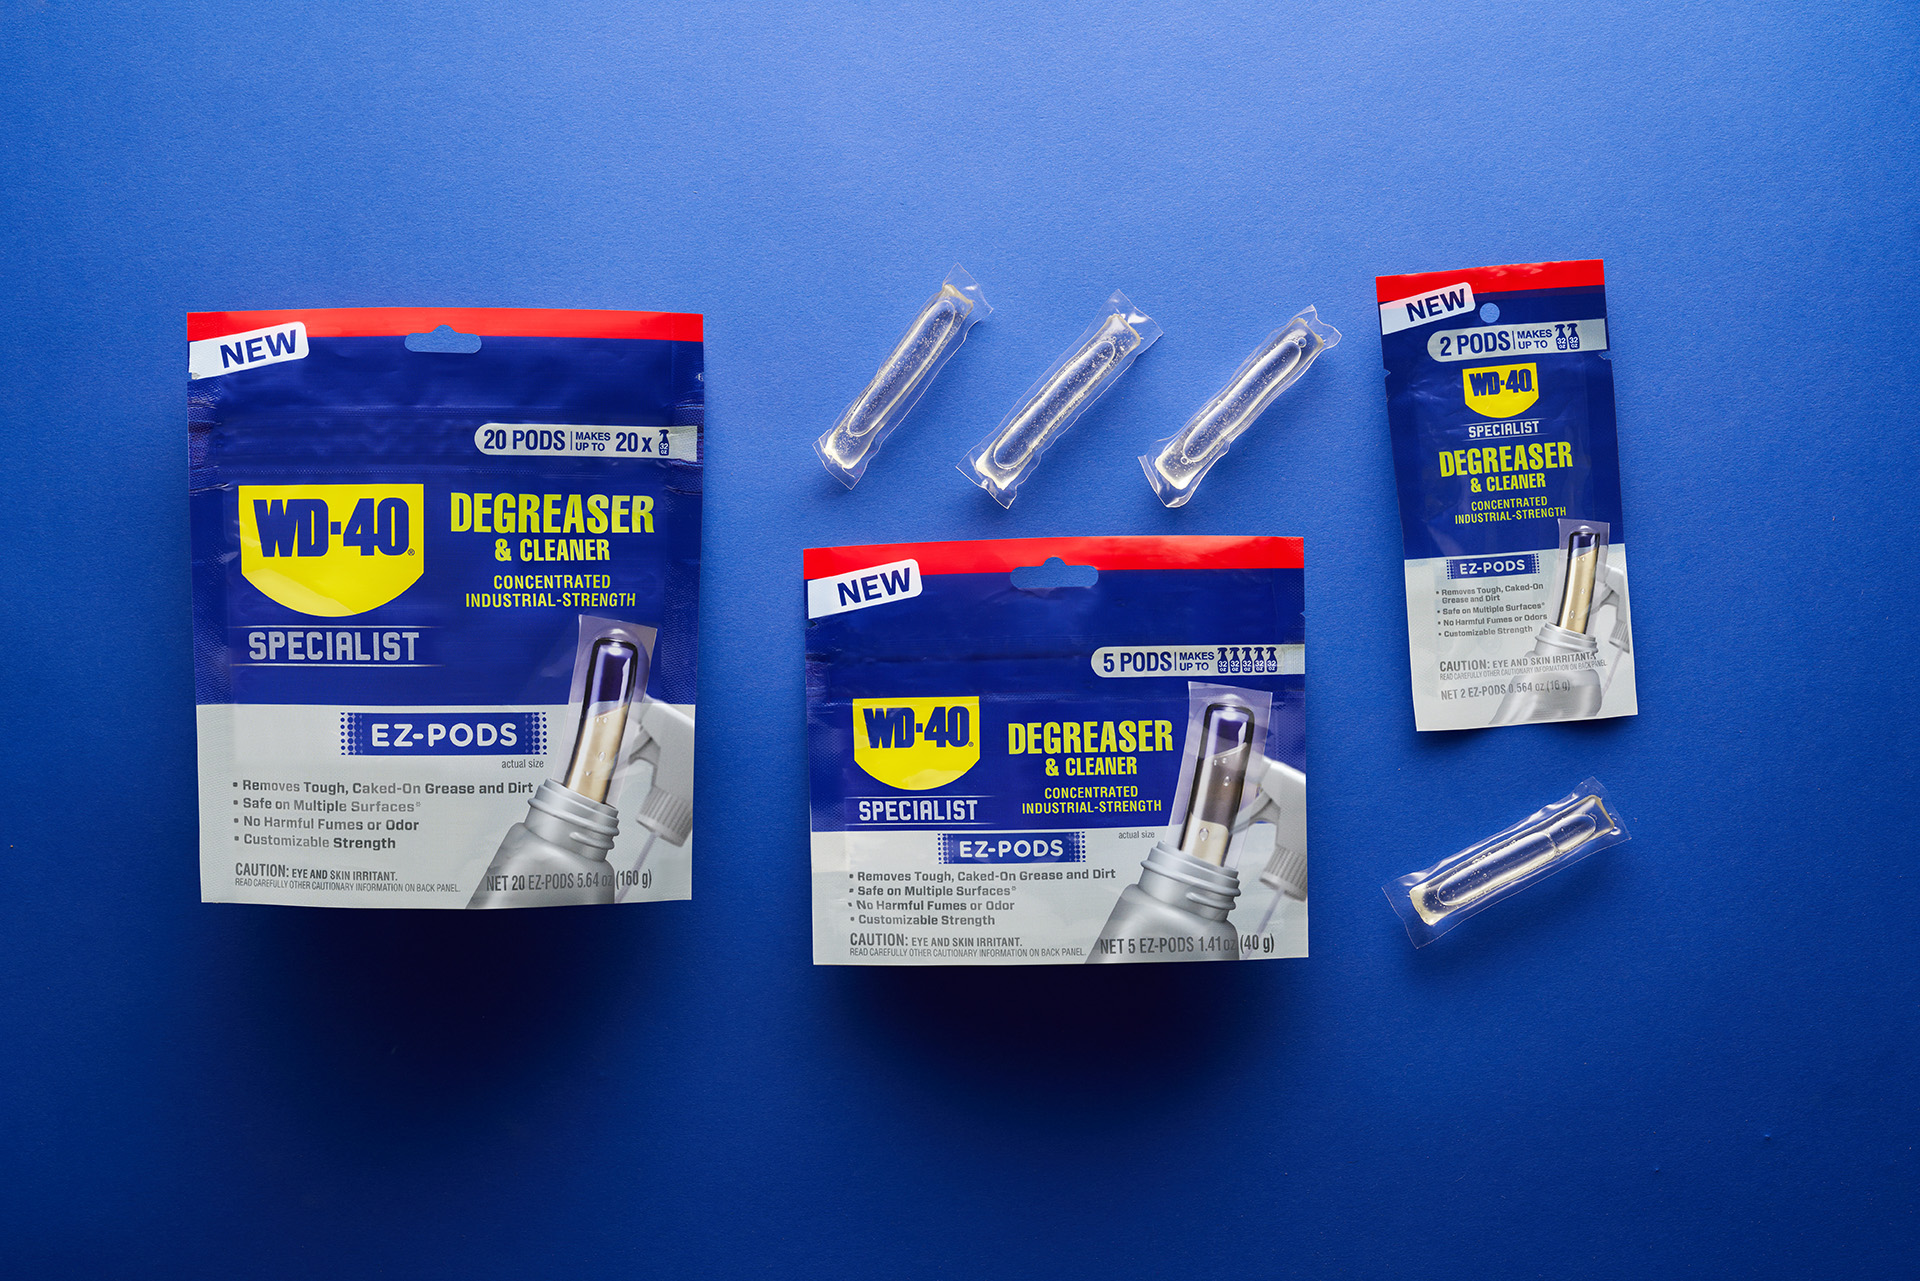 WD-40 company switches to recyclable flexible packaging with new WD-40 Specialist EZ-PODS degreaser & cleaner product